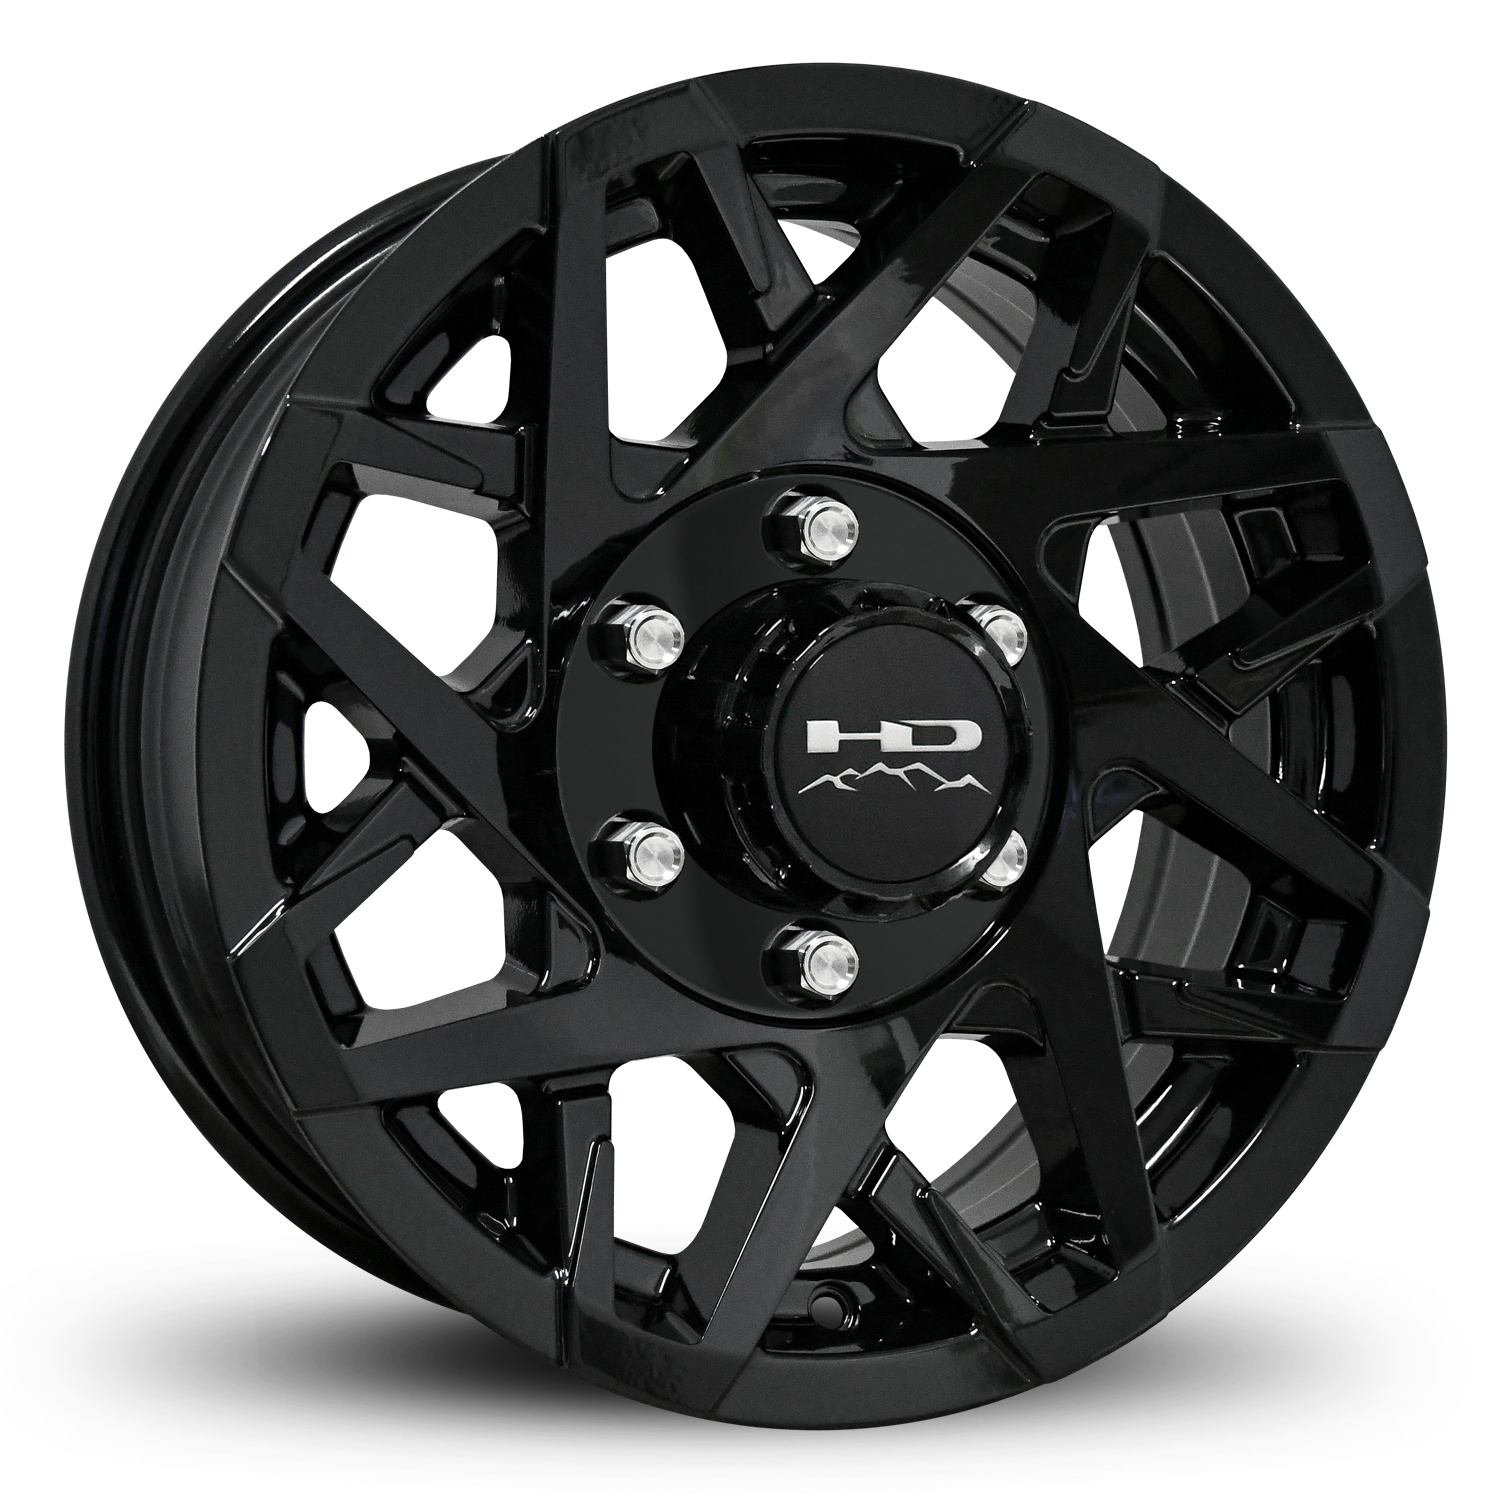 HD Off-Road Canyon Custom Trailer Wheel Rims in 16x6.0 16x6 All Gloss Black with Center Cap & Logo fits 6x5.50 / 6x139.7 Axle Boat, Car, RV, Travel, Concession, Horse, Utility, Lawn & Garden, & Landscaping.